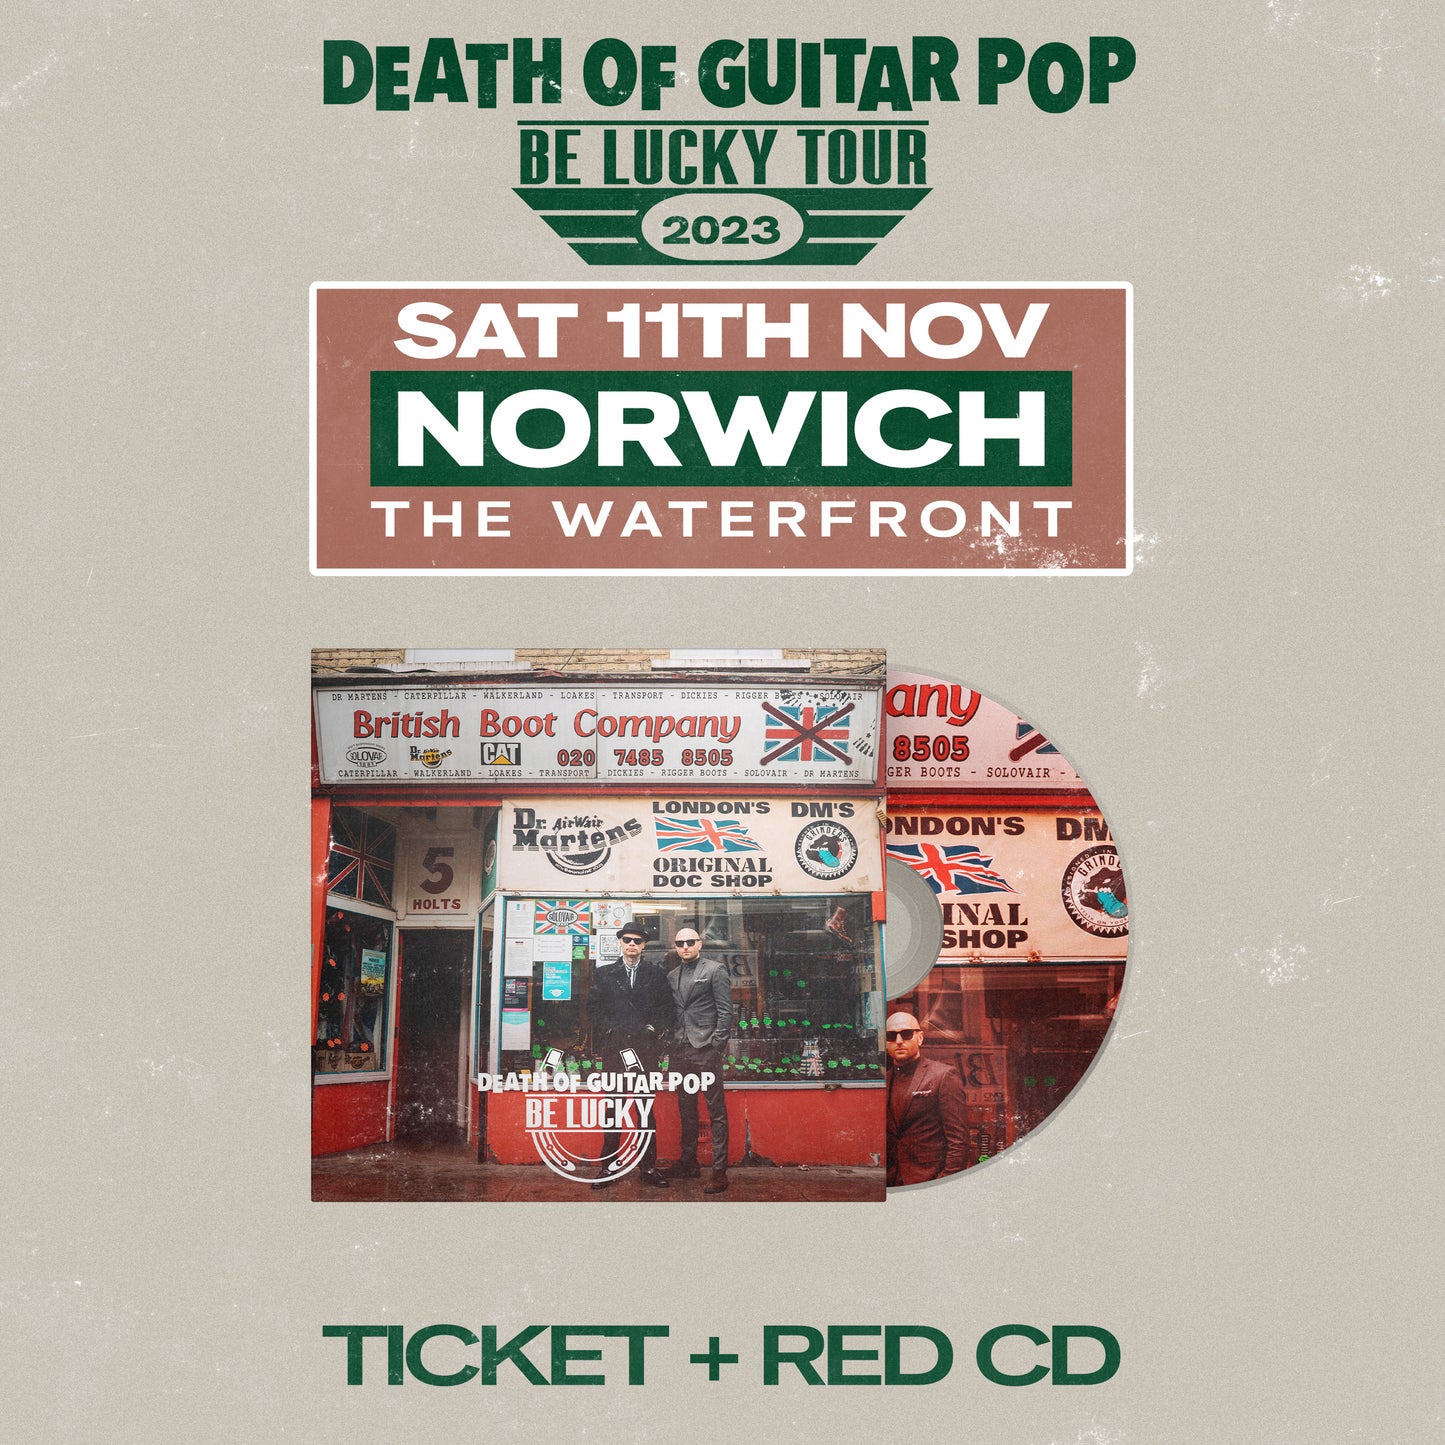 NORWICH - THE WATERFRONT 11/11/23 - GENERAL ADMISSION + RED CD BUNDLE